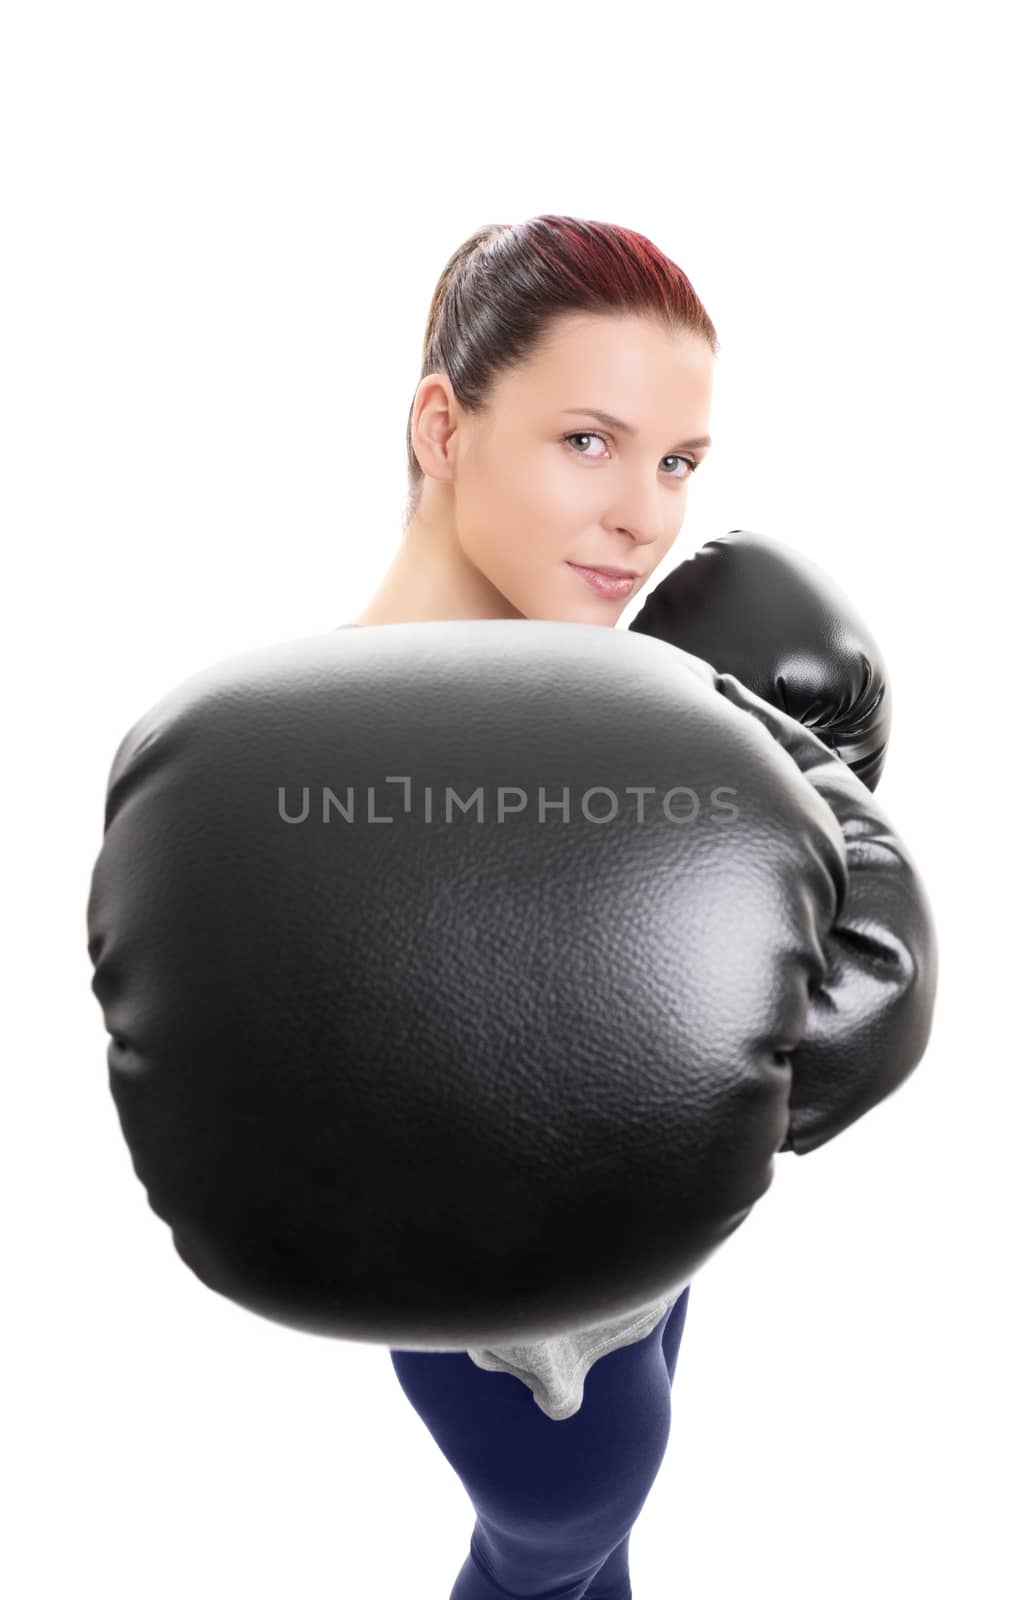 Close up shot of a young beautiful woman with boxing gloves punching or jabbing towards the camera, isolated on white background. Focus on the black boxing glove. Sport concept.